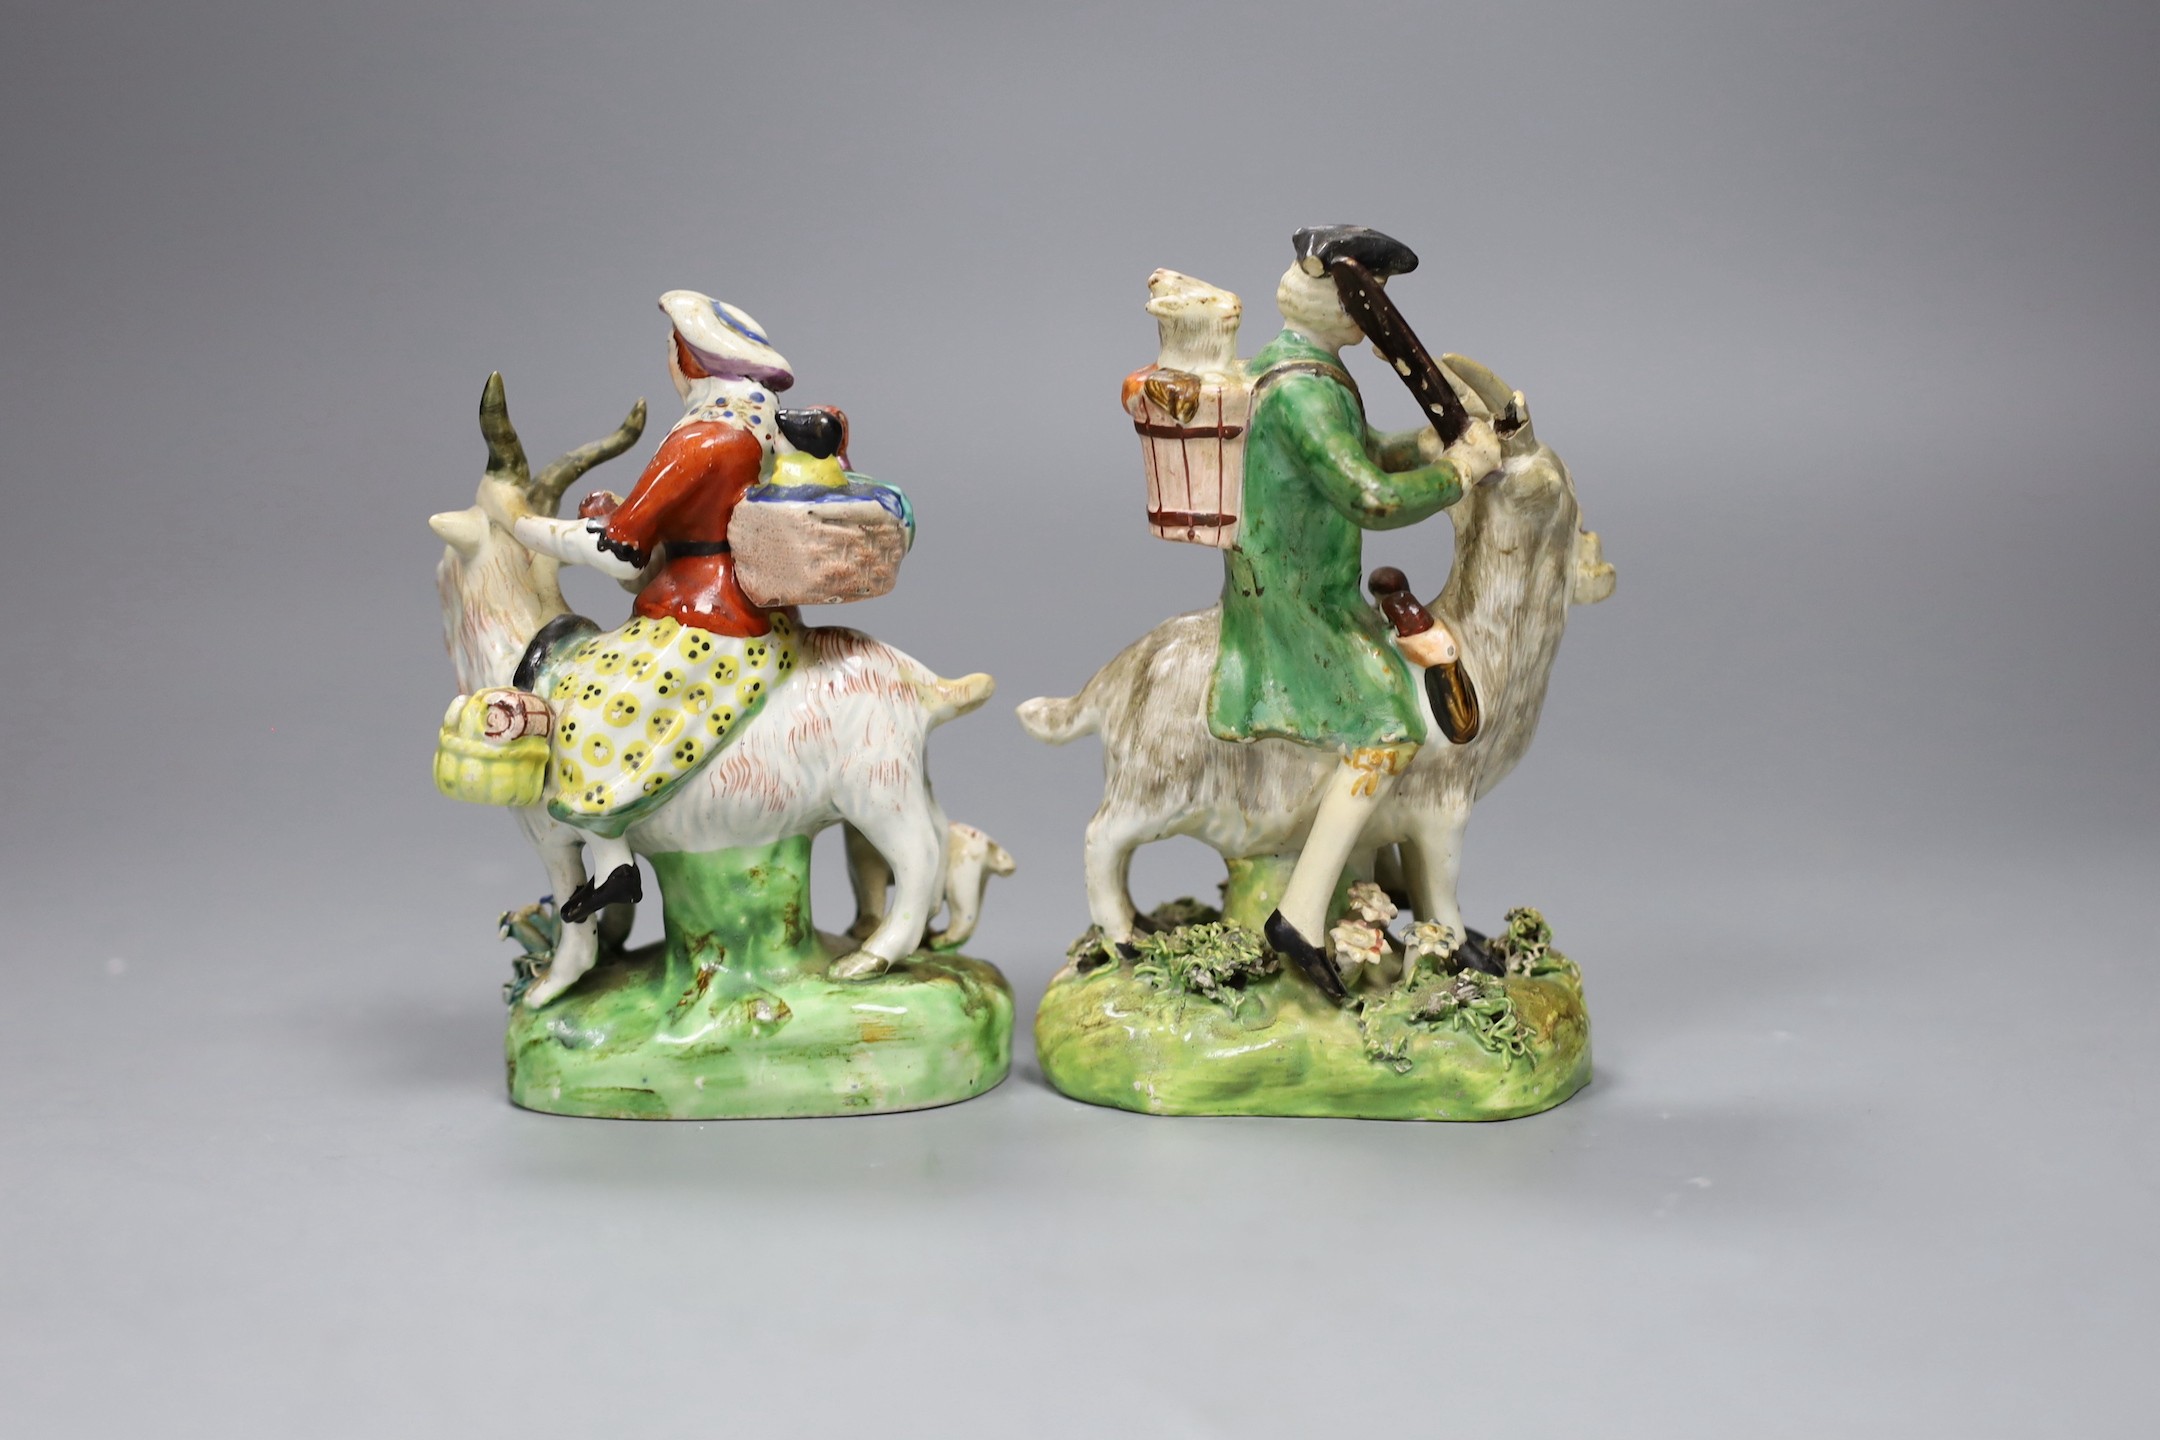 A near pair of pearlware groups Tailor and his wife, c.1820, tallest 13.5cm